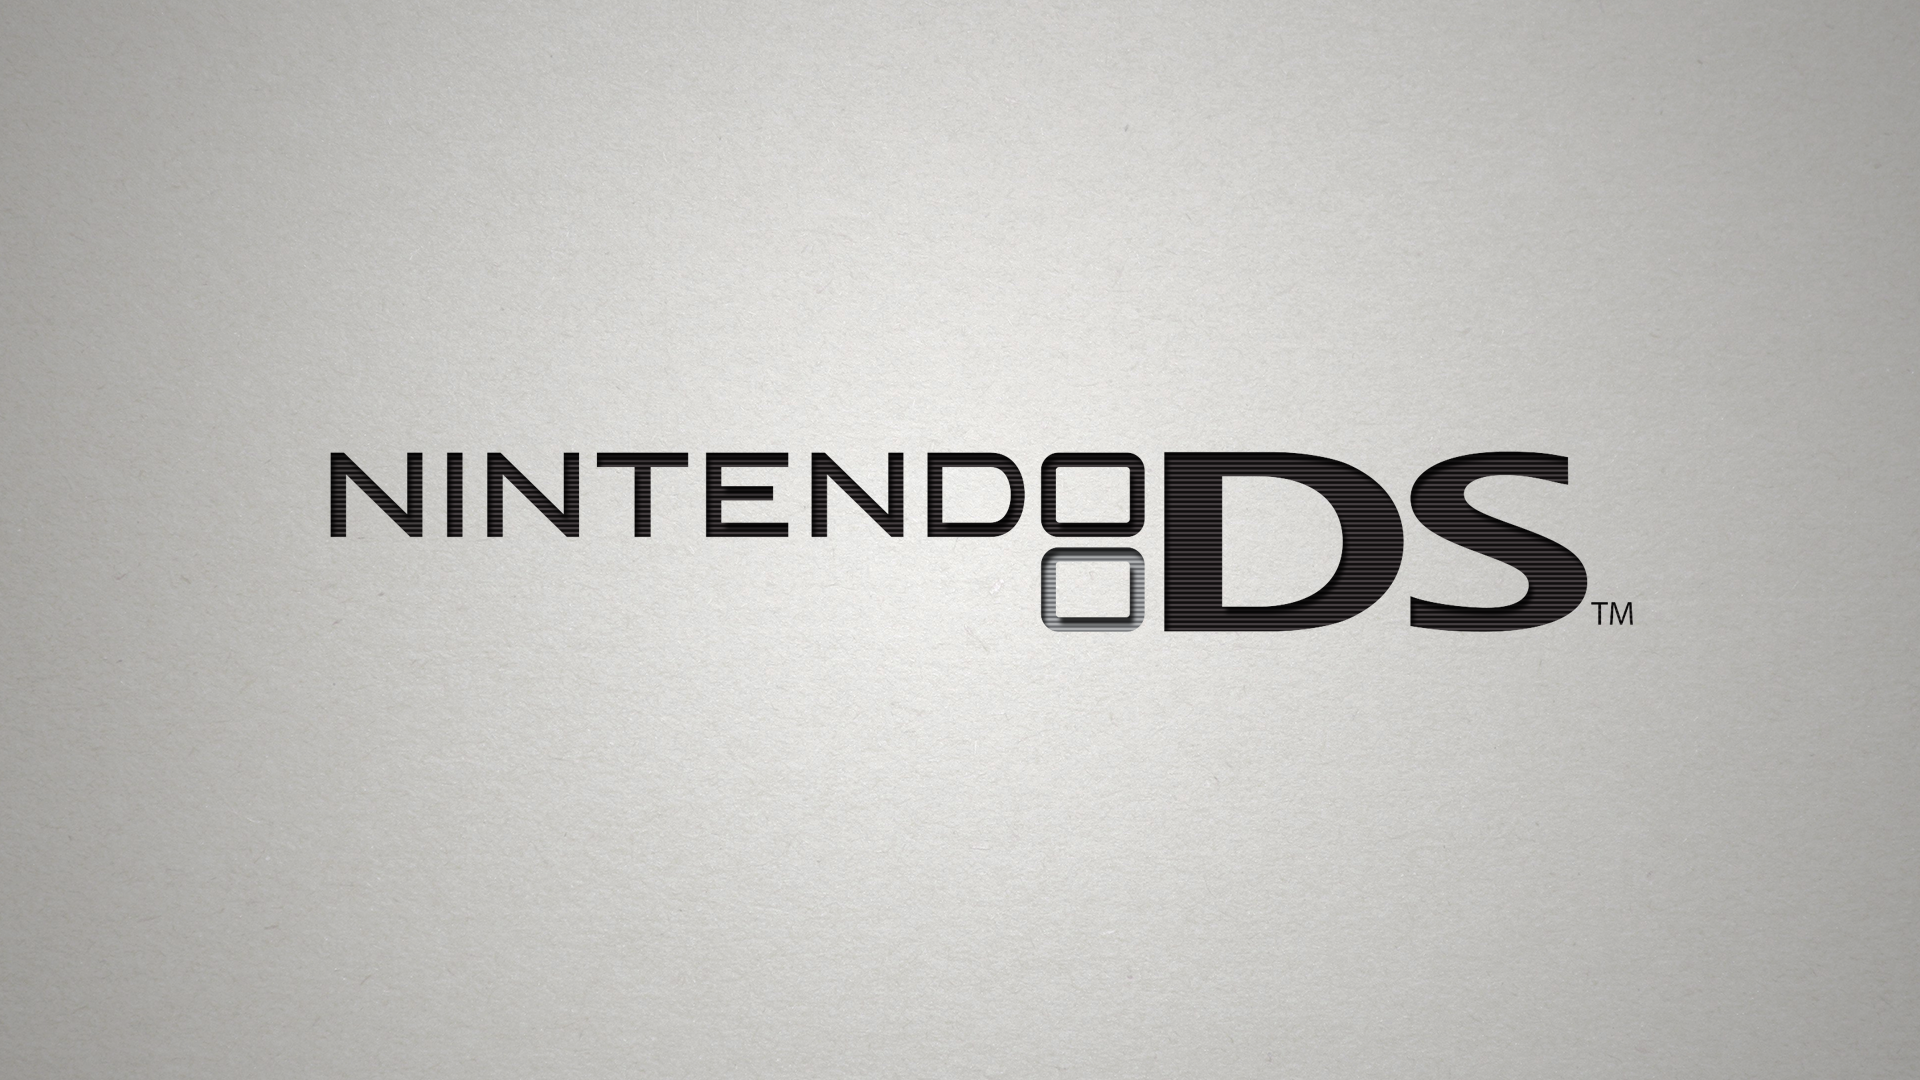 Ds Wallpapers